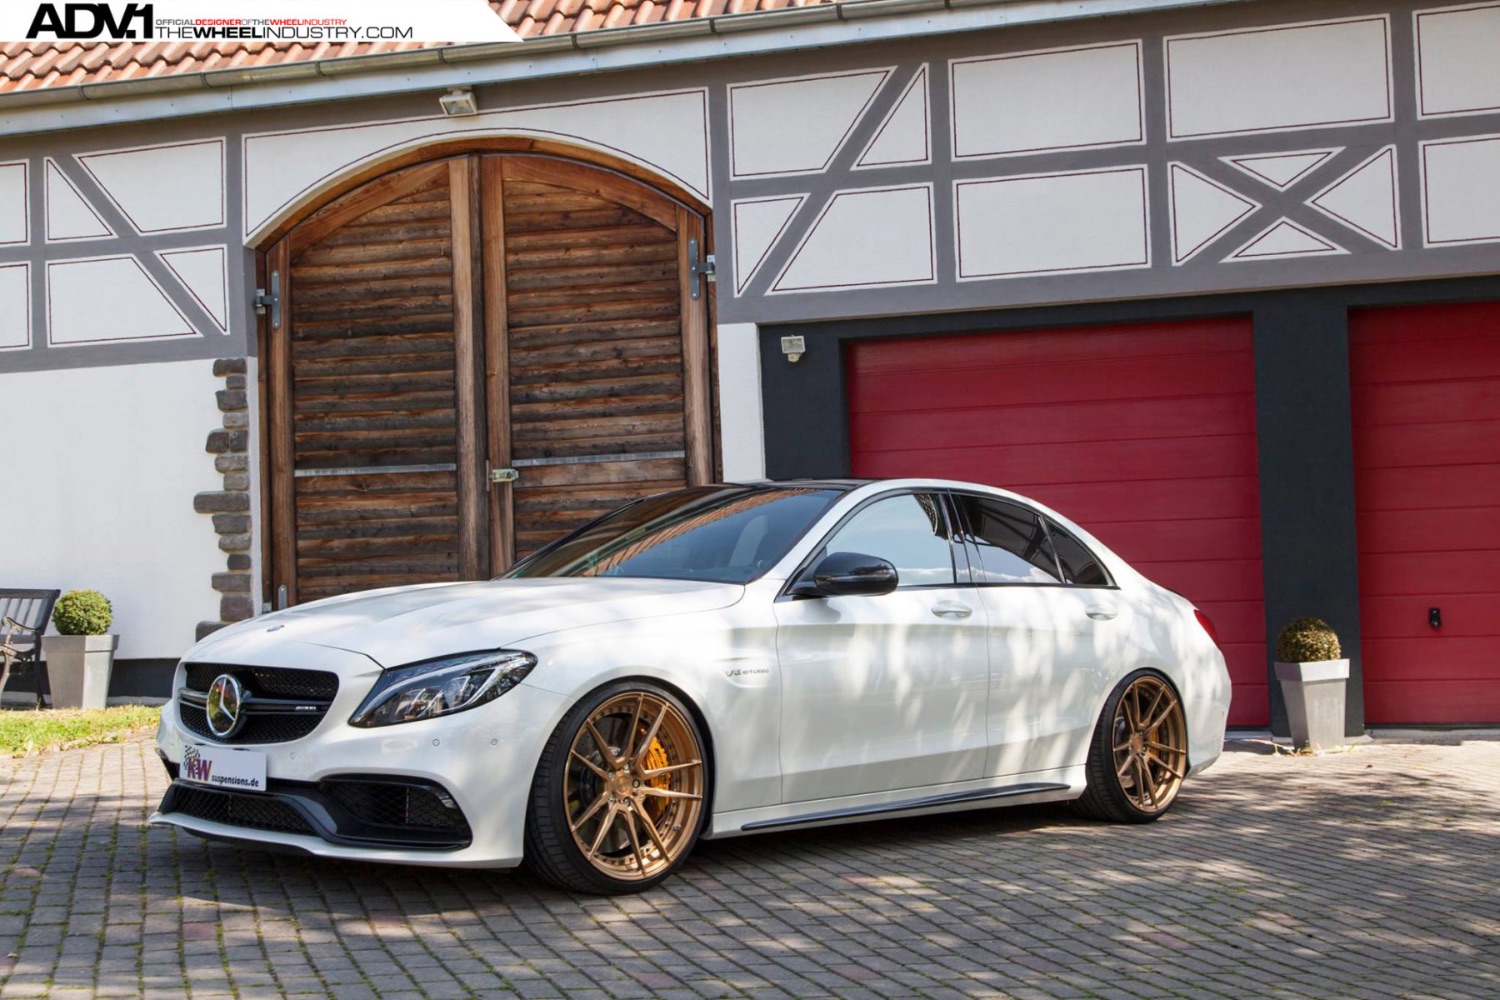 adv1-mercedes-amg-c63s-coilover-lowered-wheels-d